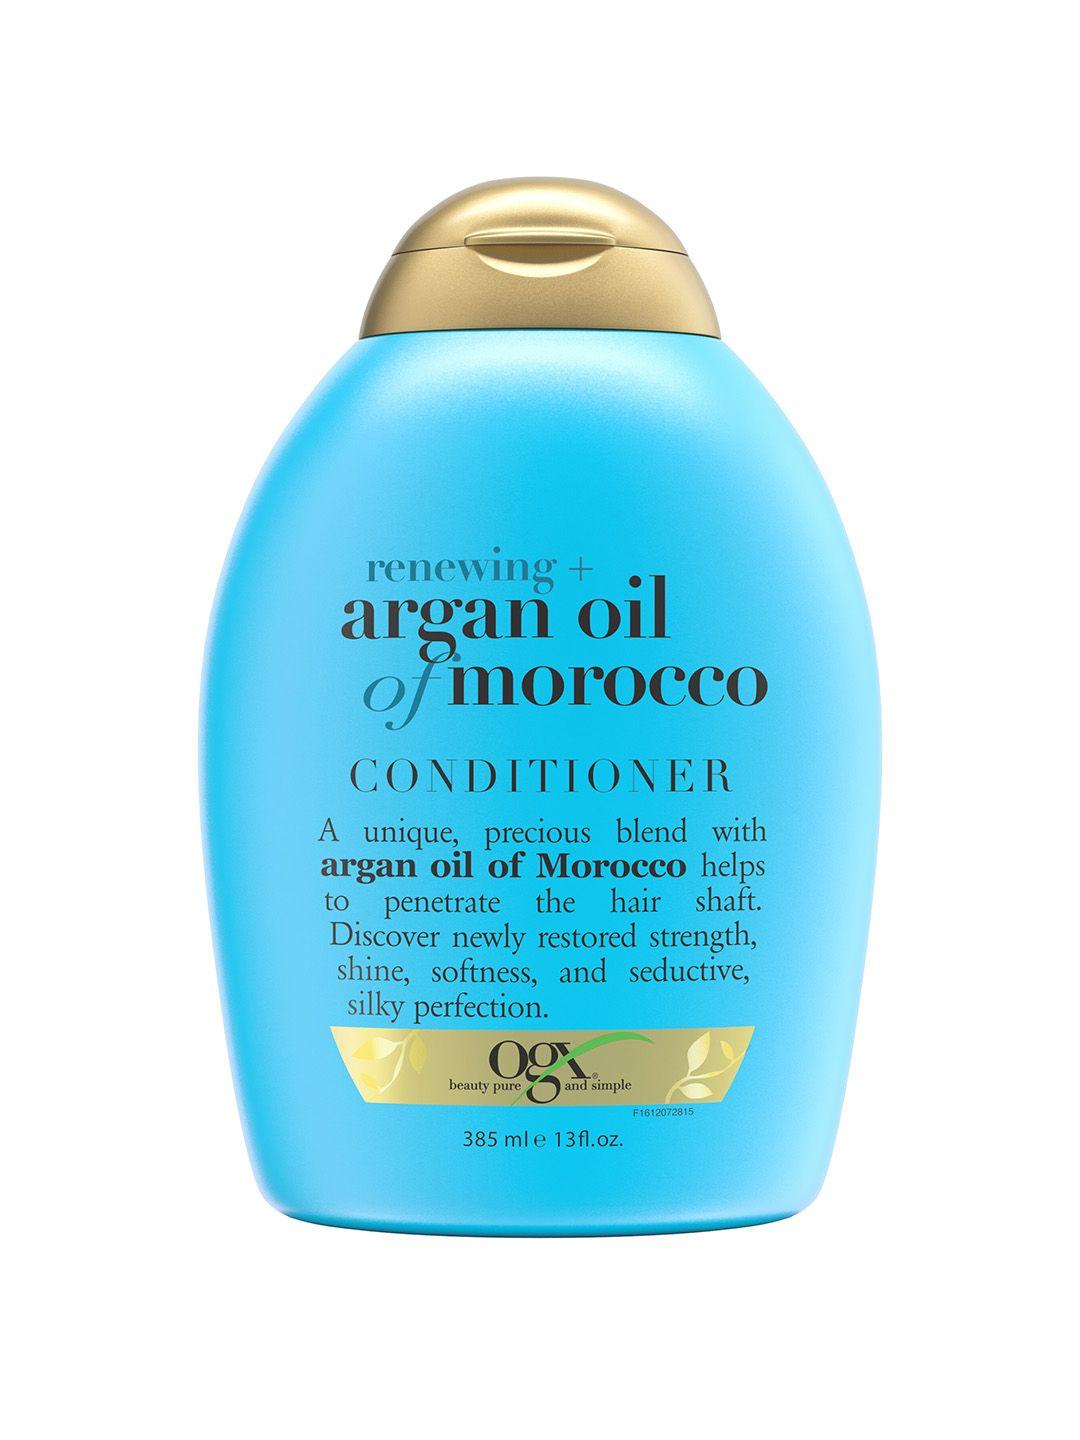 ogx renewing argan oil of morocco conditioner to strengthen hair - 385 ml